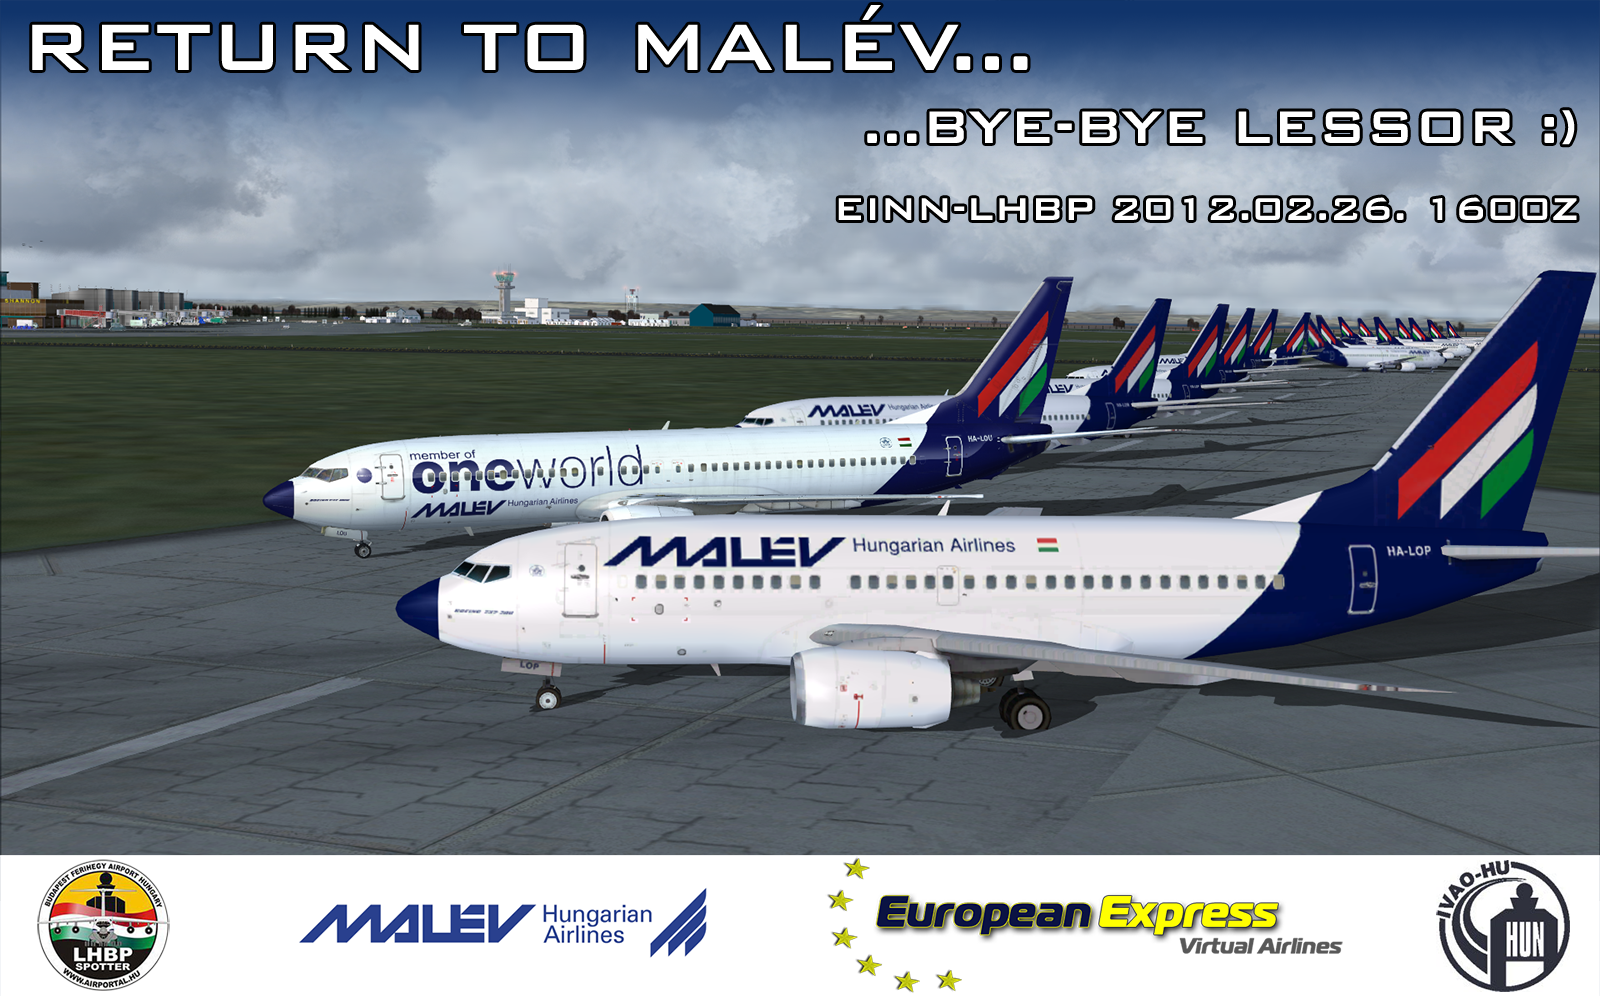 malev9 3 1600px.png